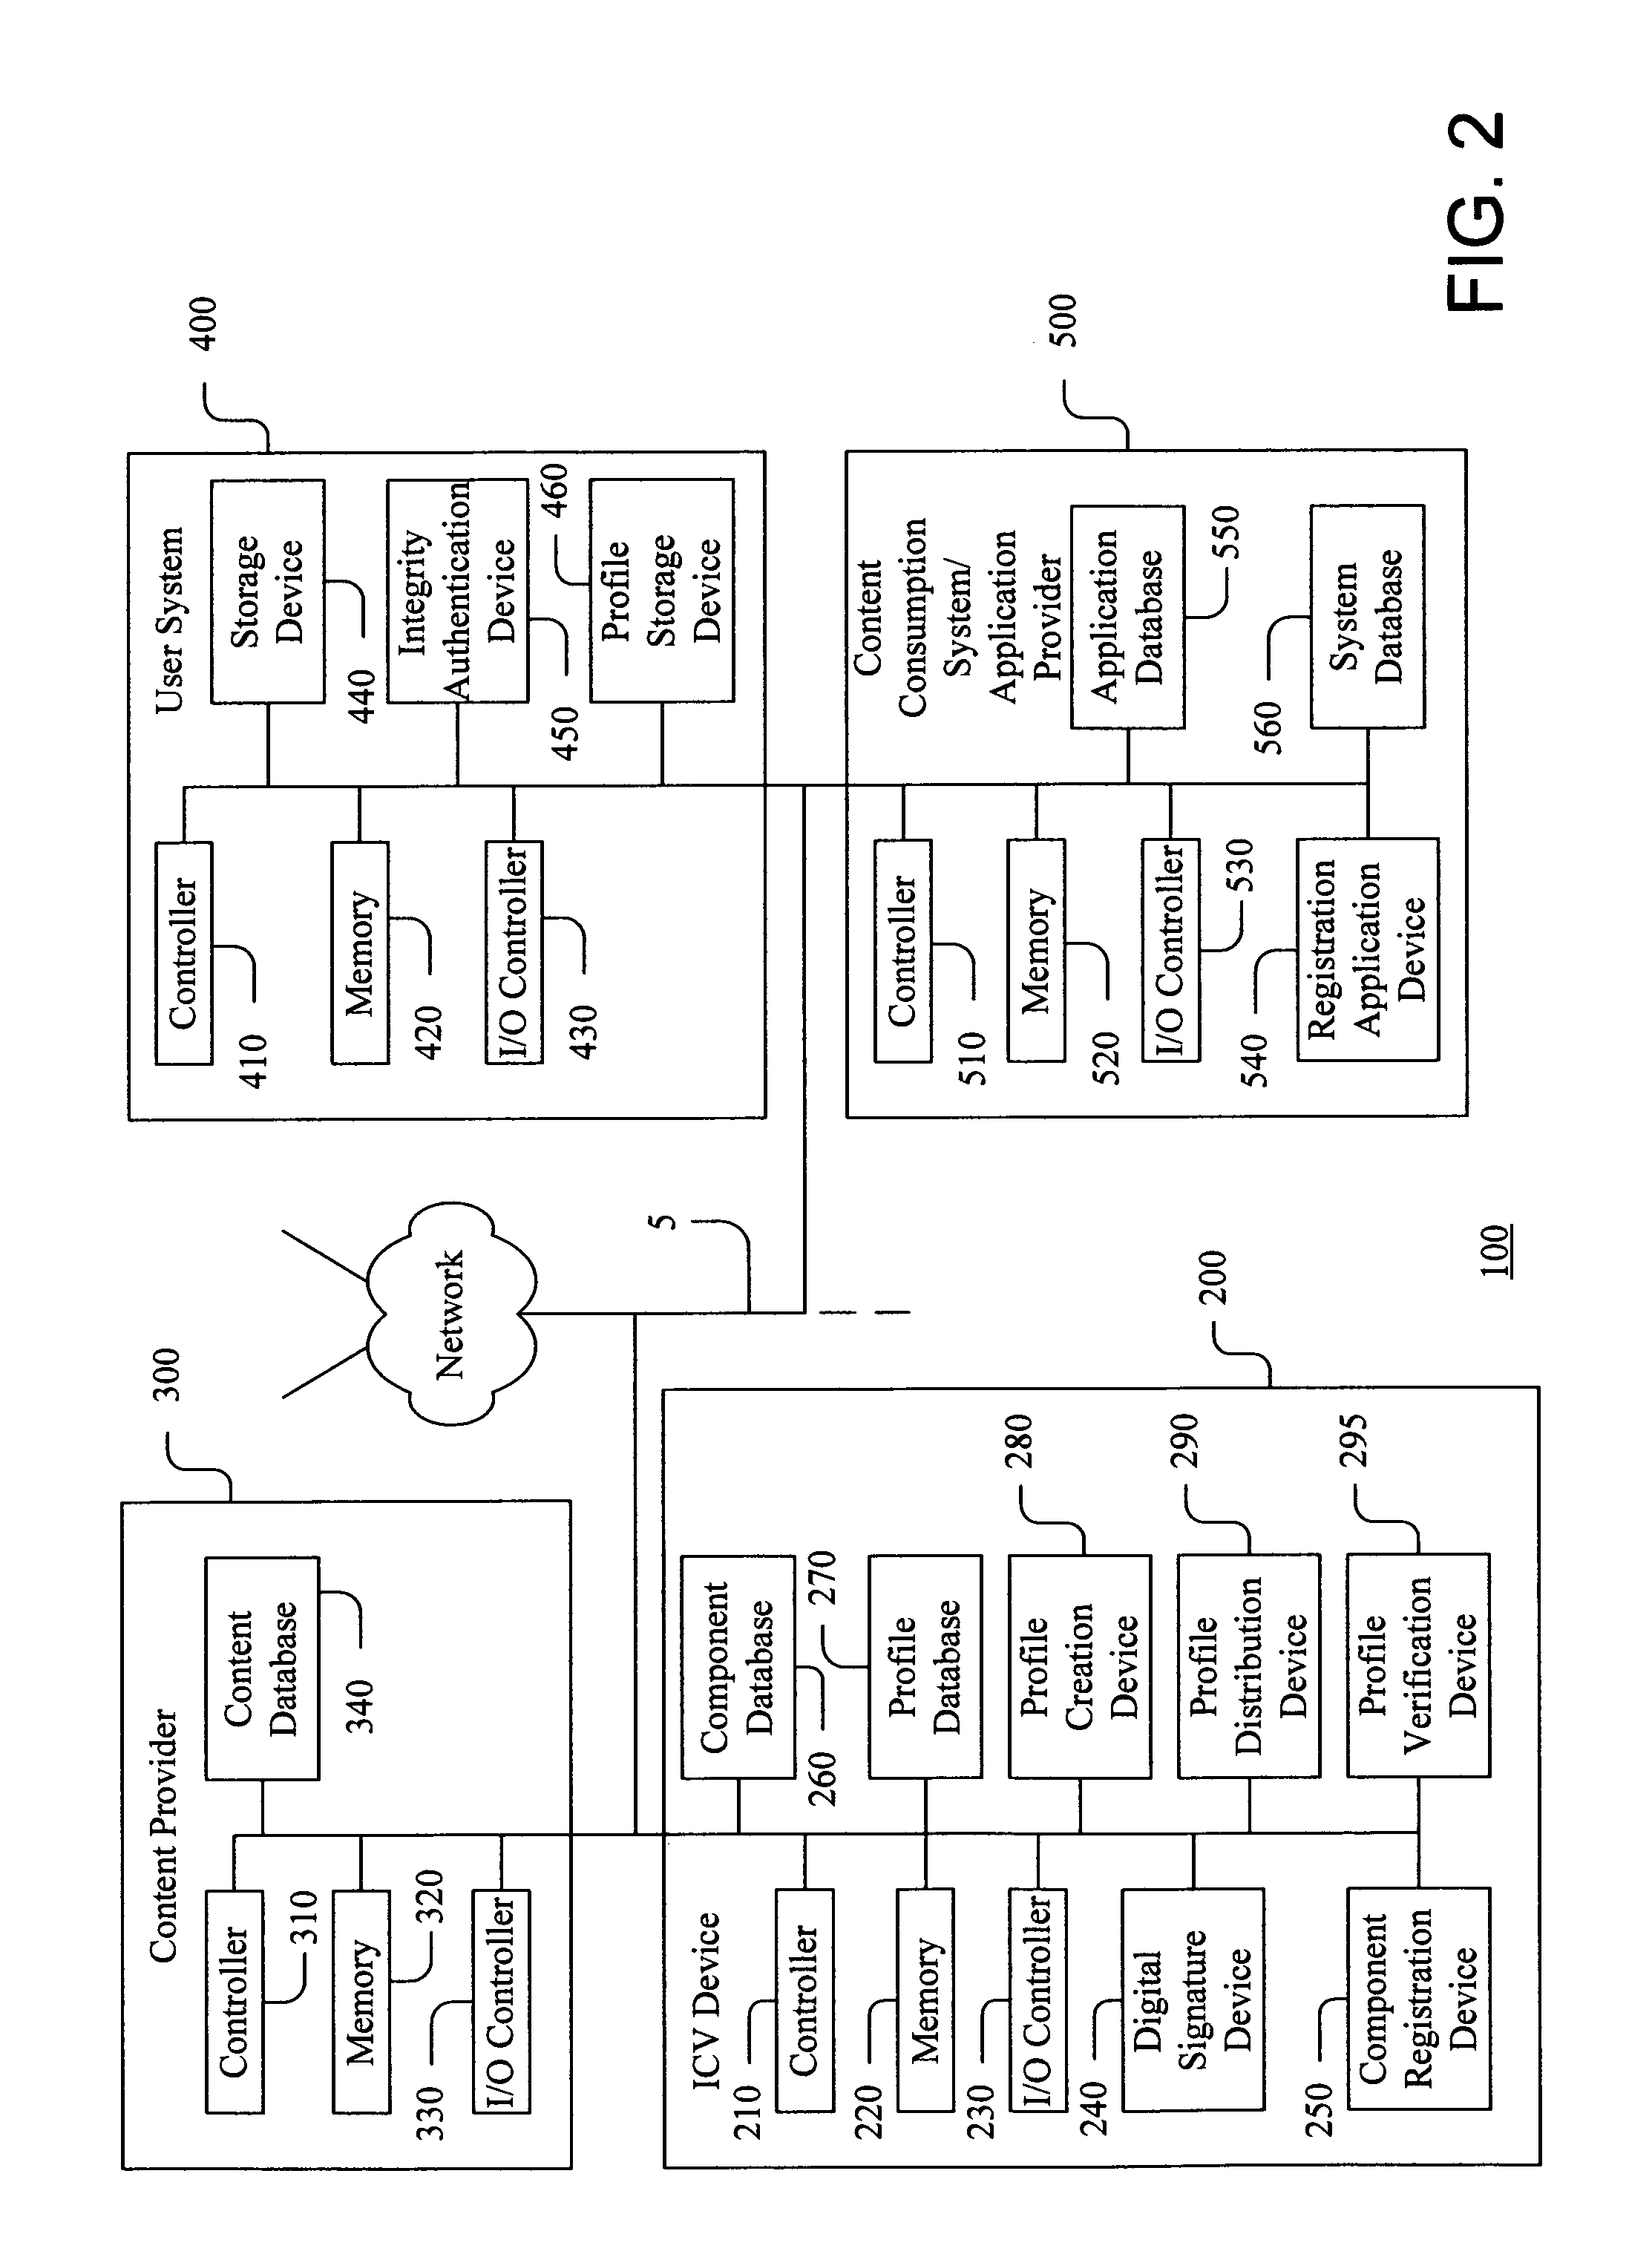 Systems and methods for integrity certification and verification of content consumption environments